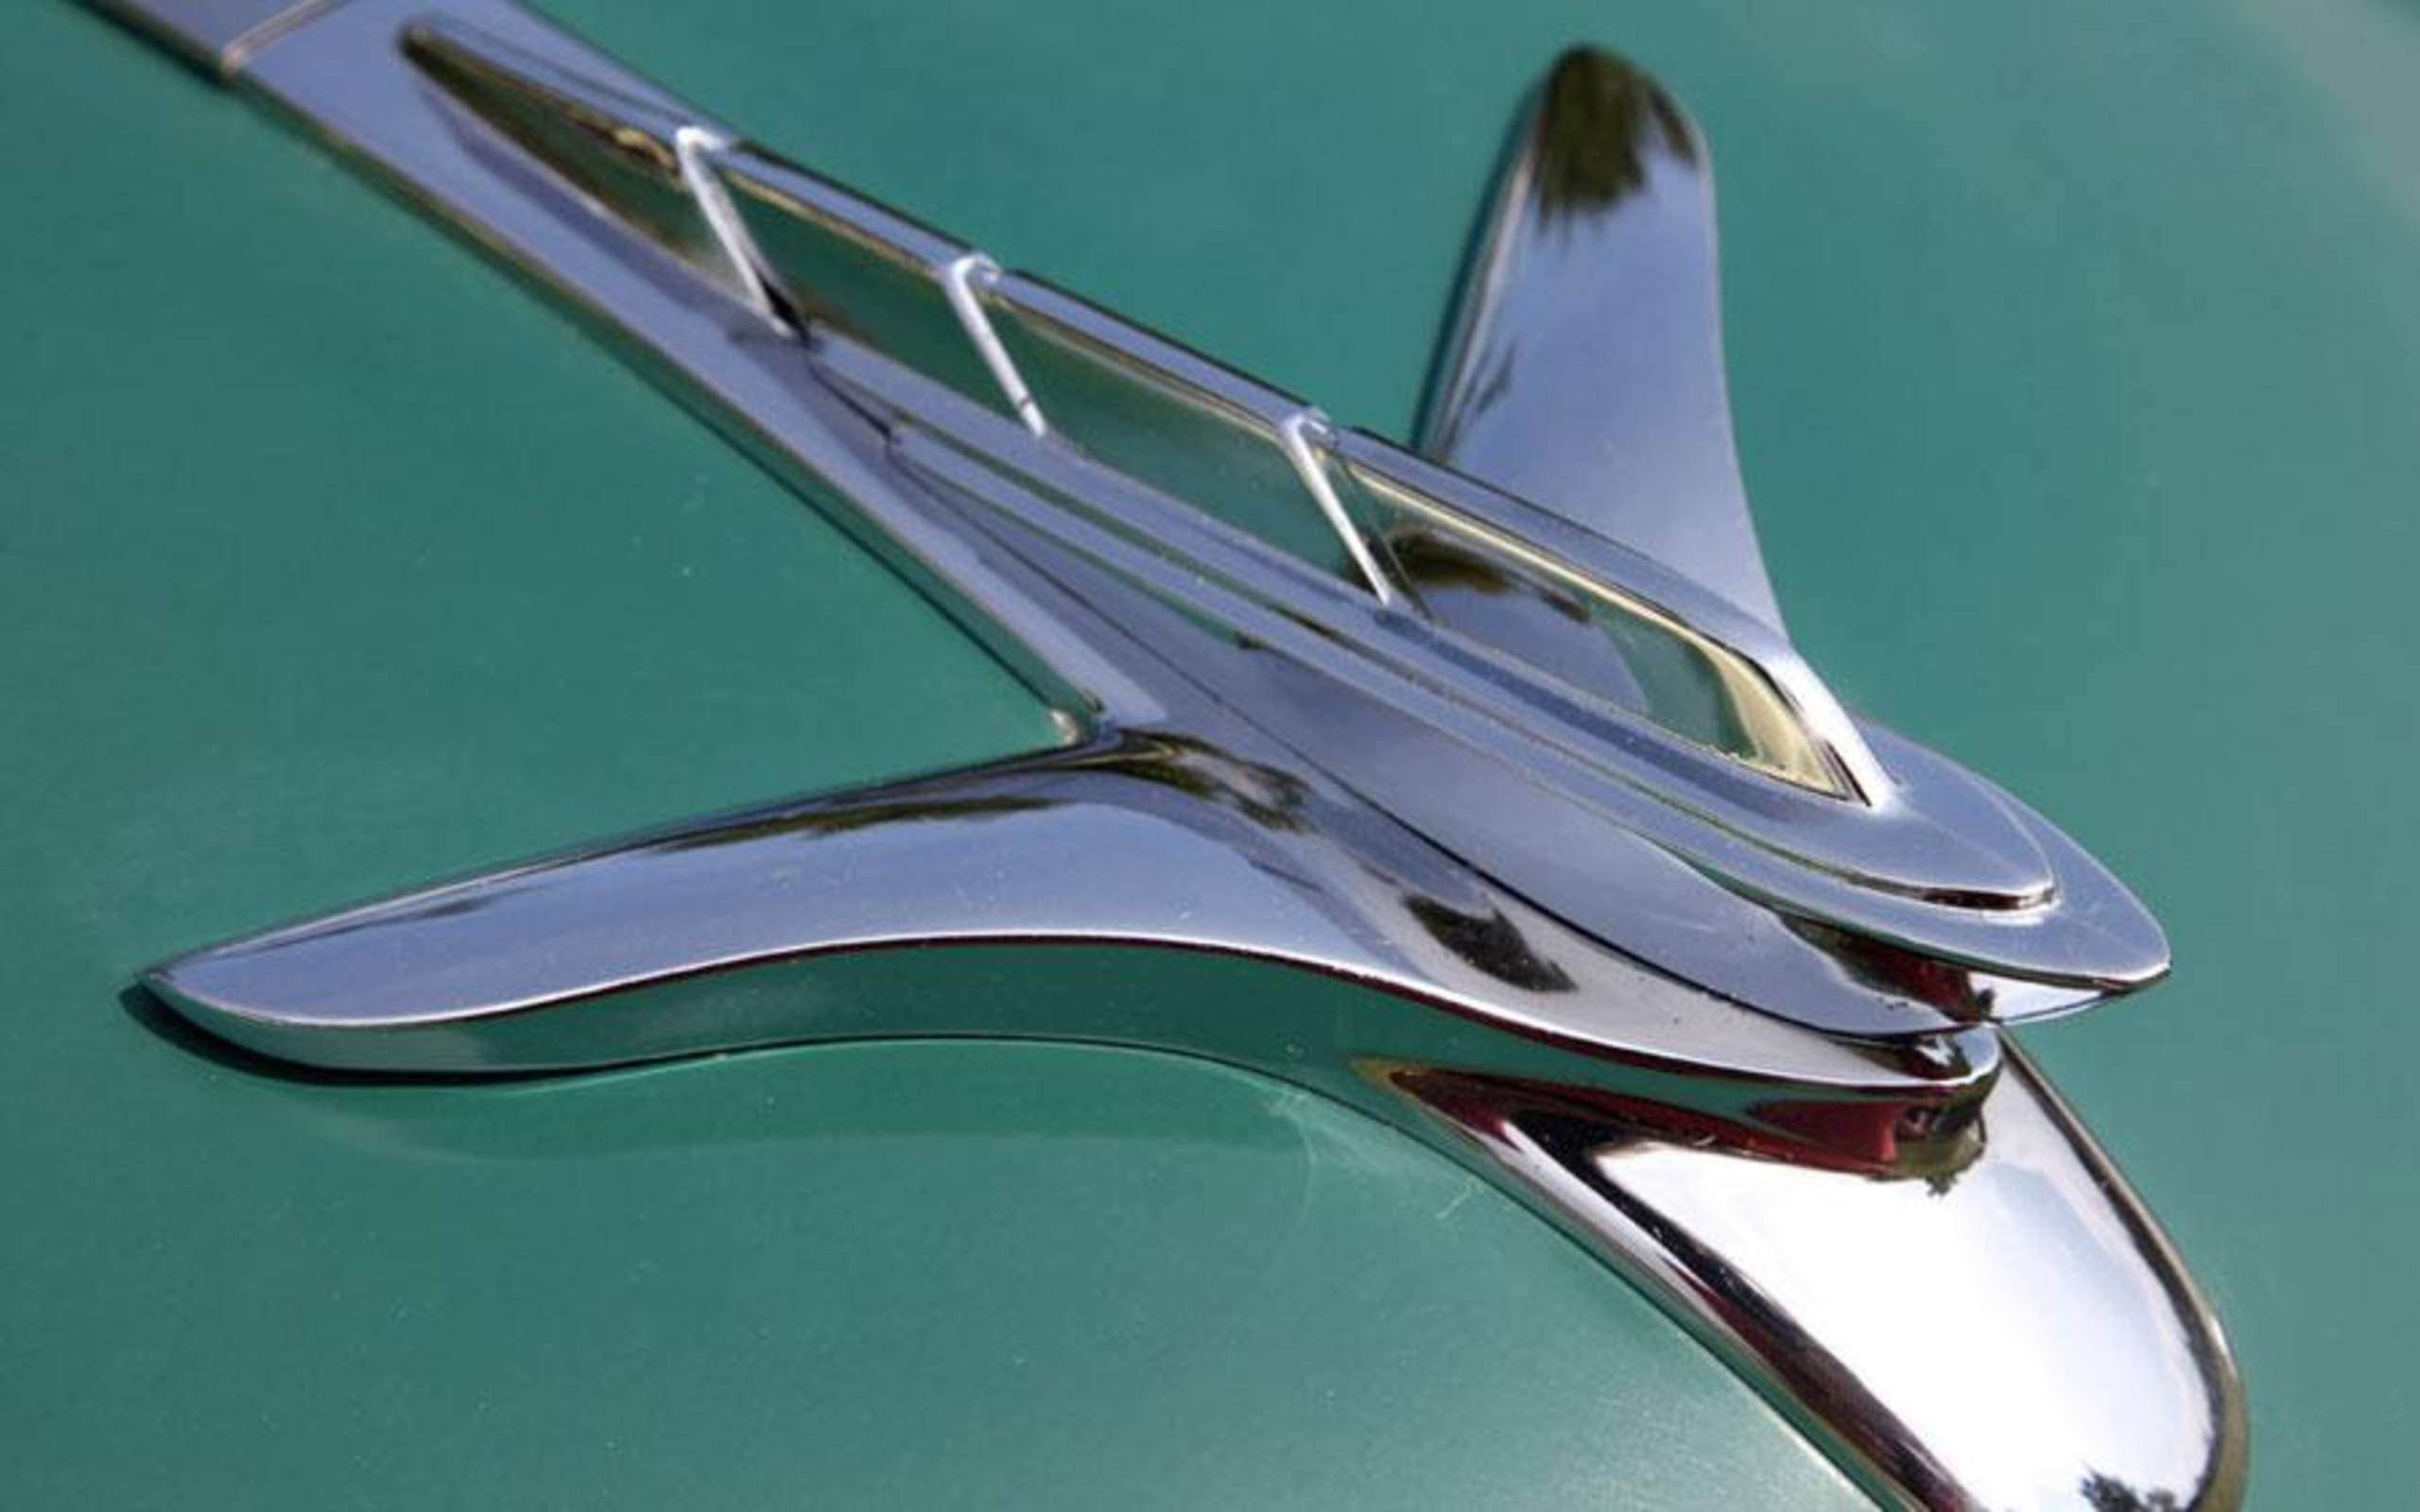 Plymouth hood ornaments through the years